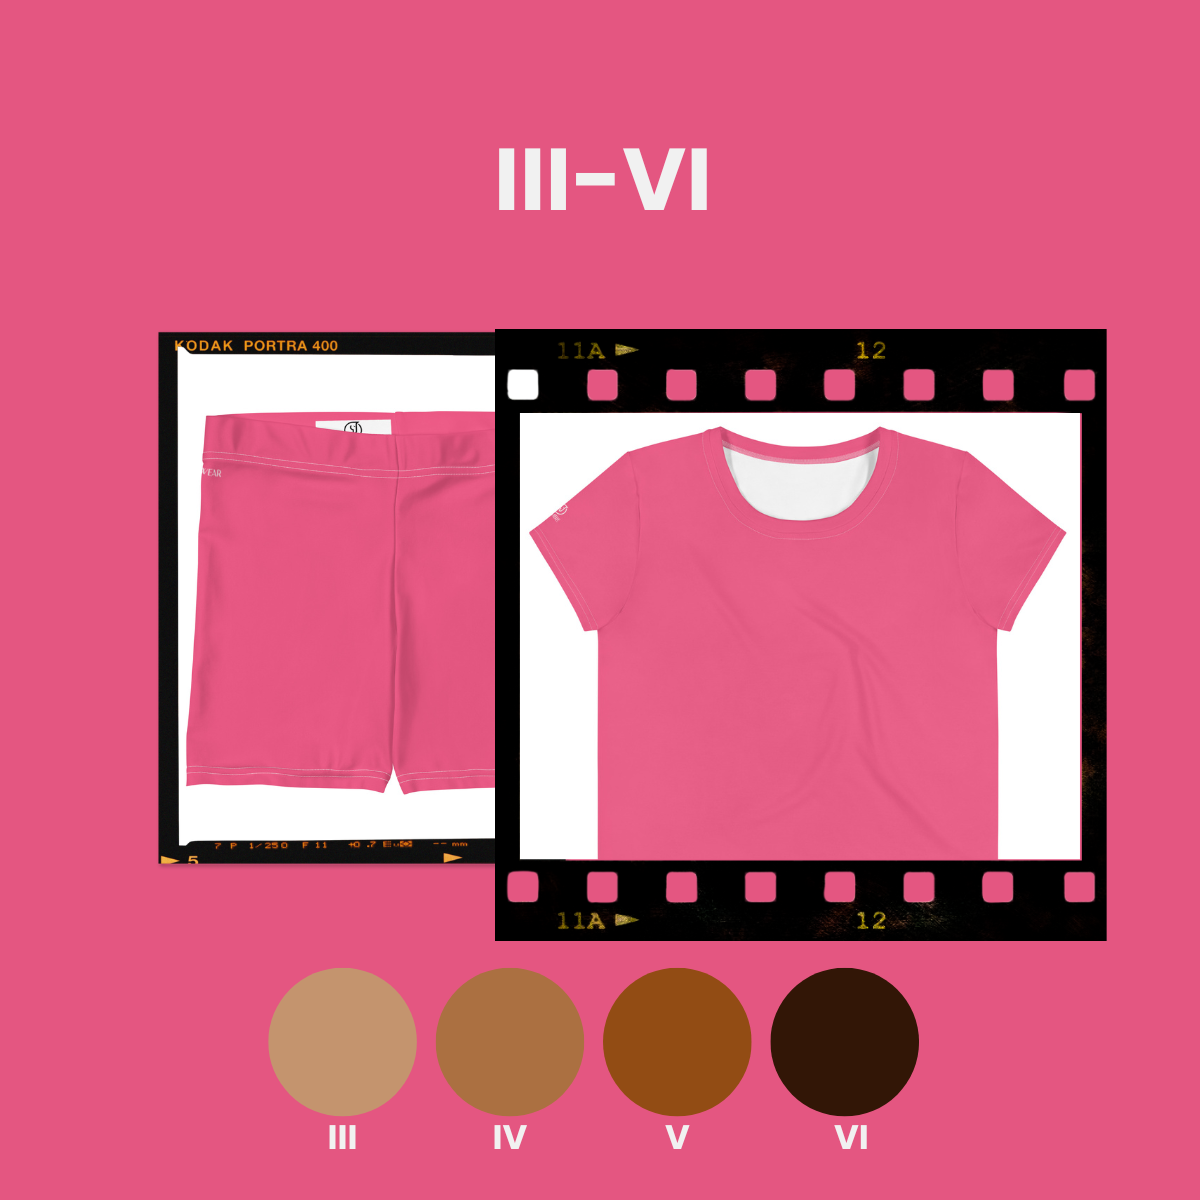 Humble Sportswear color match clothes, color compare tools image